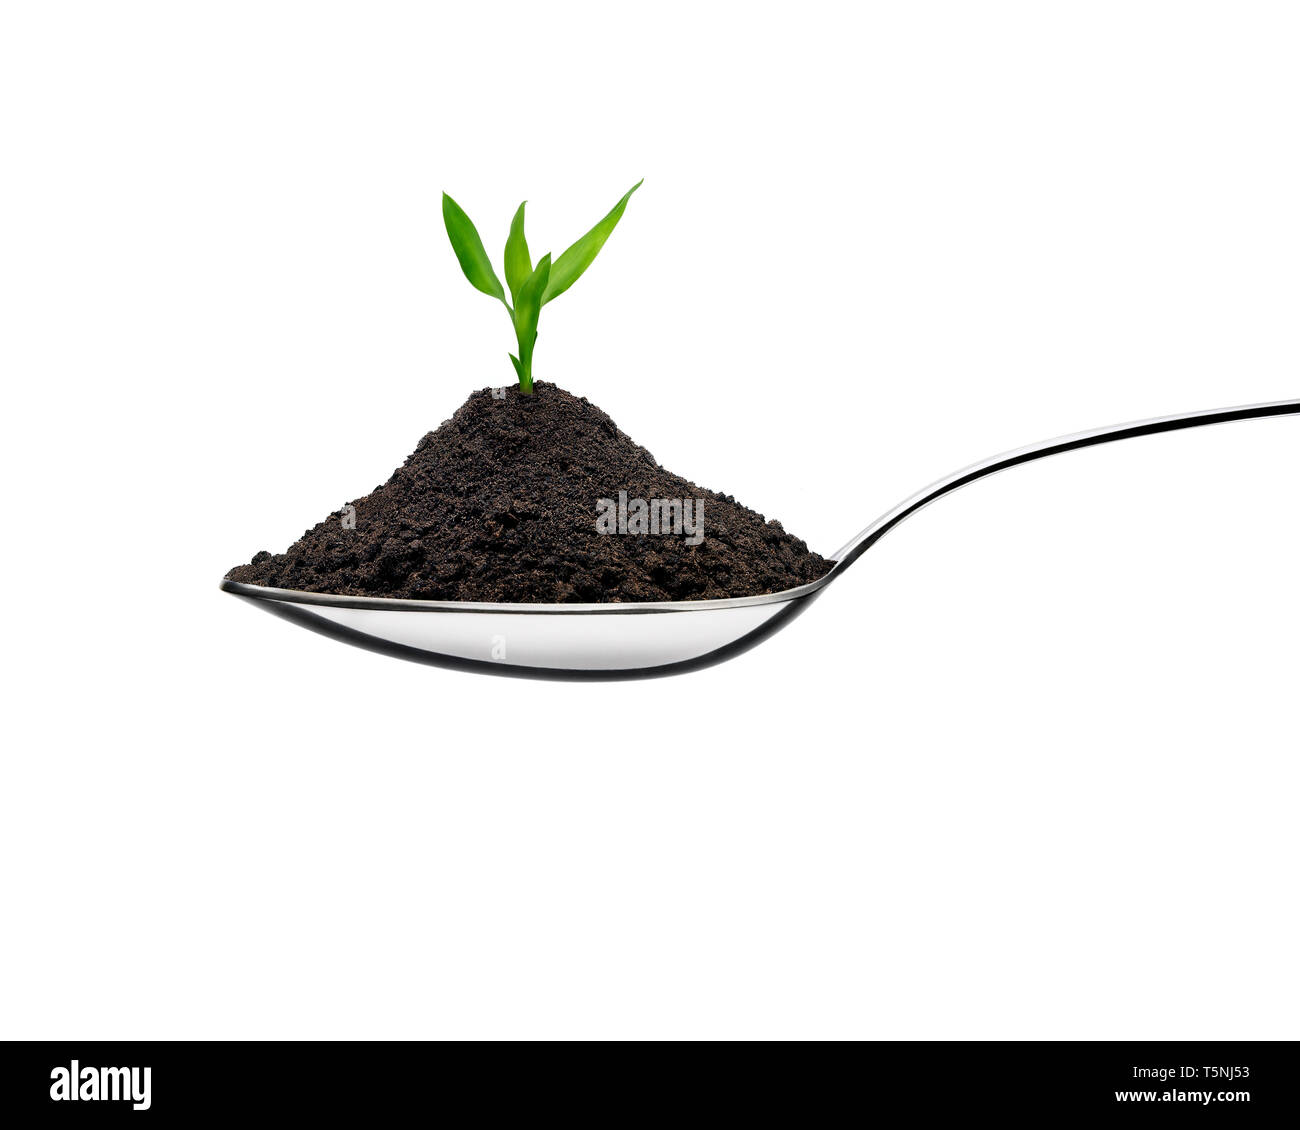 Pile of soil into a spoon and growing plant in a ecological concept. Front view against white background. Stock Photo